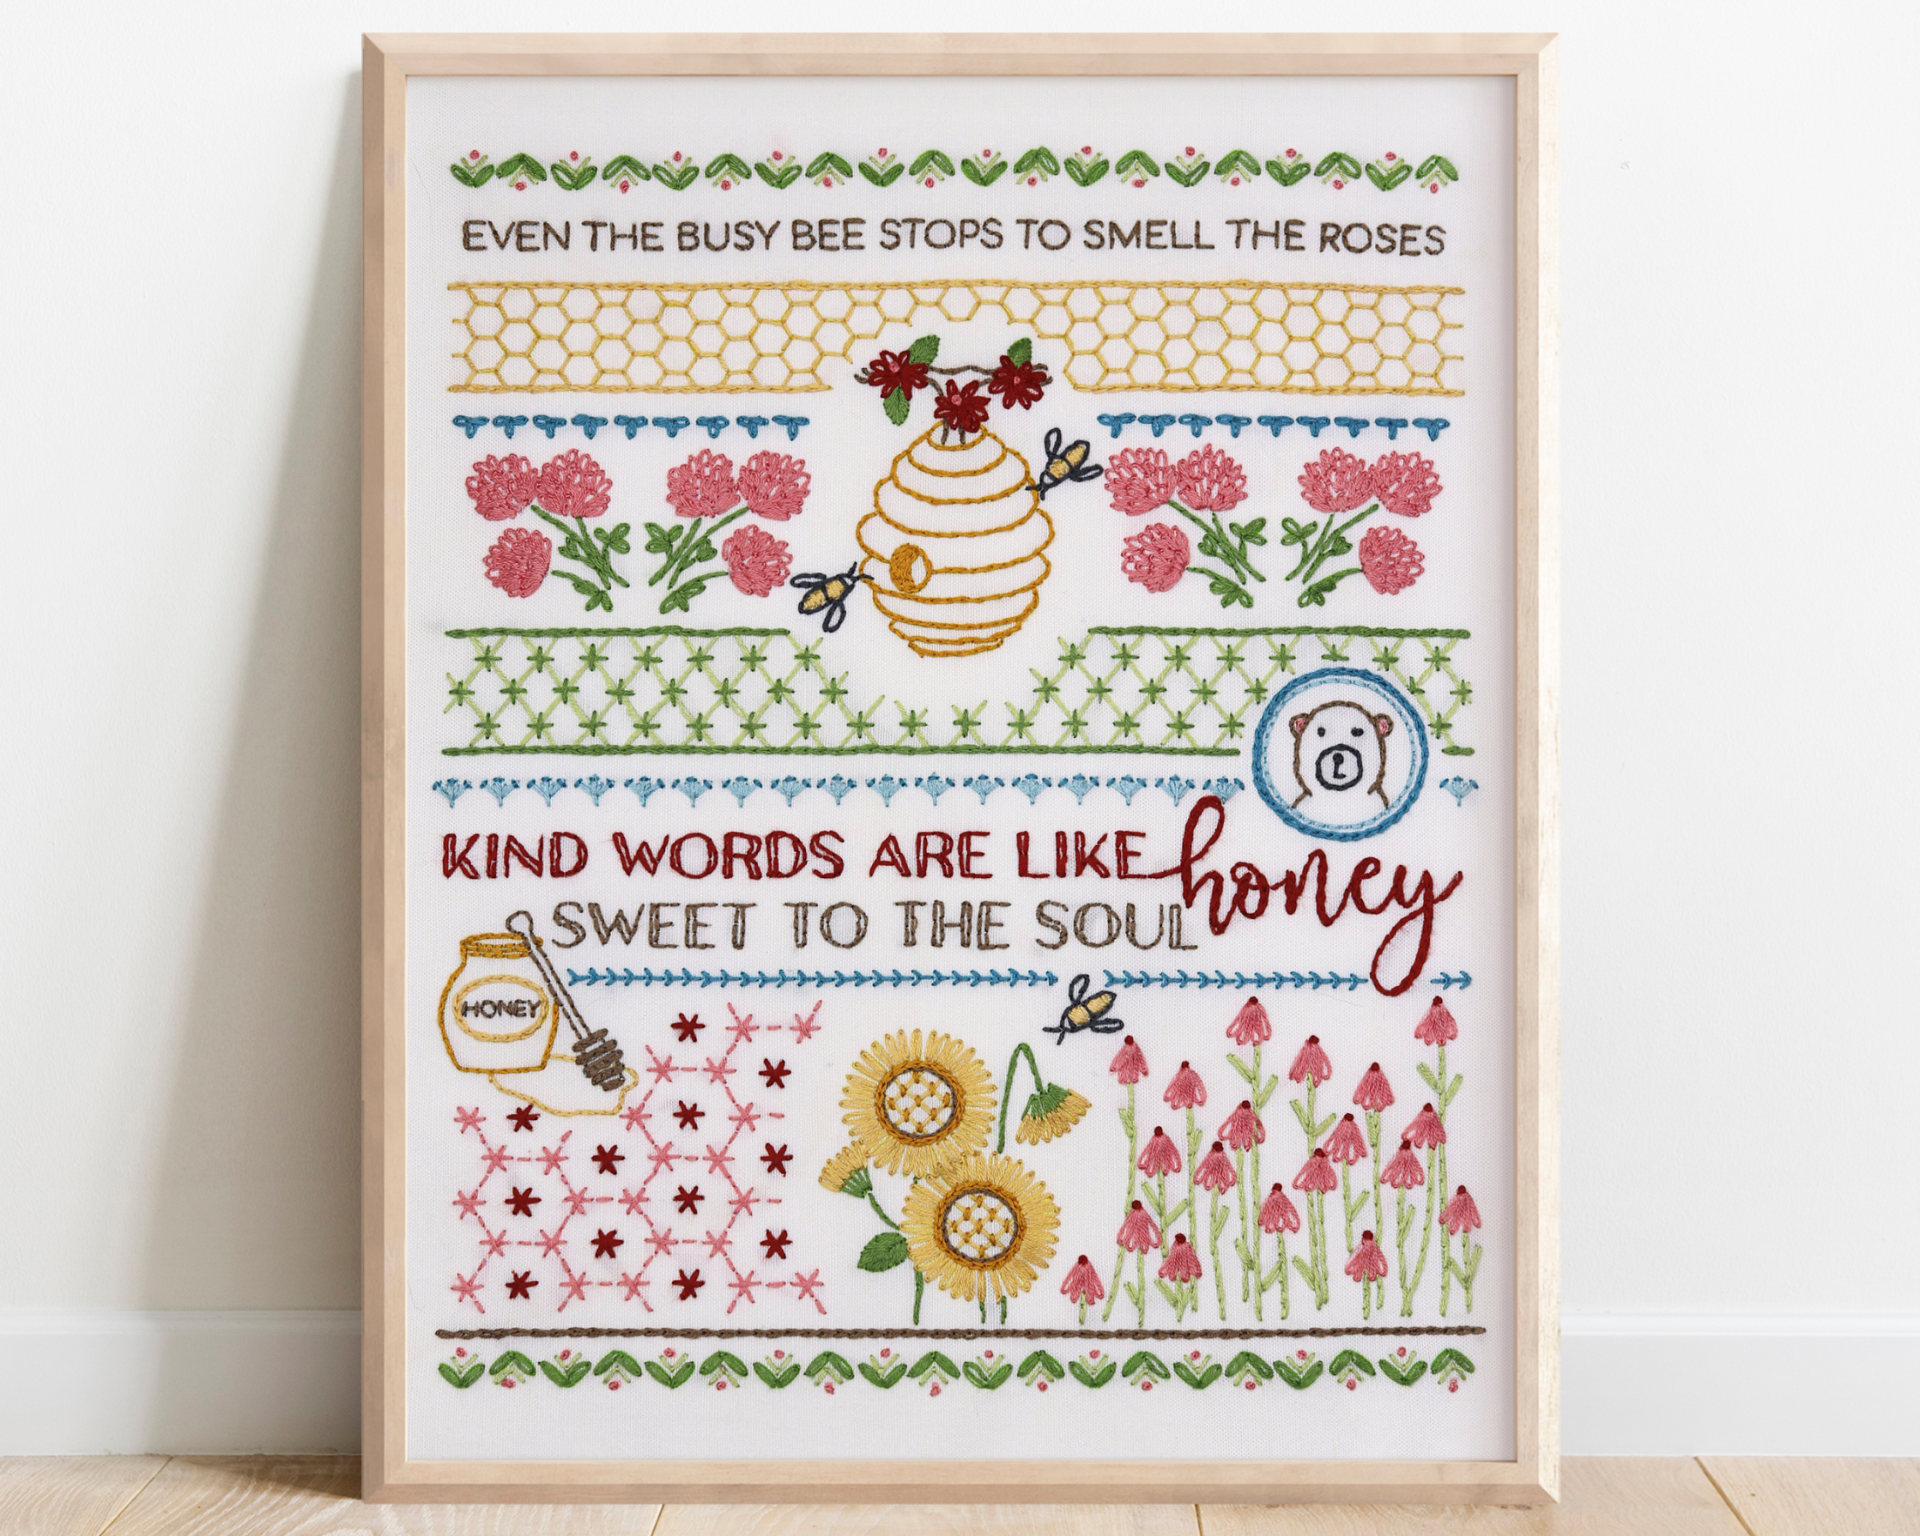 framed embroidery stitch sampler with honeybee-theme 